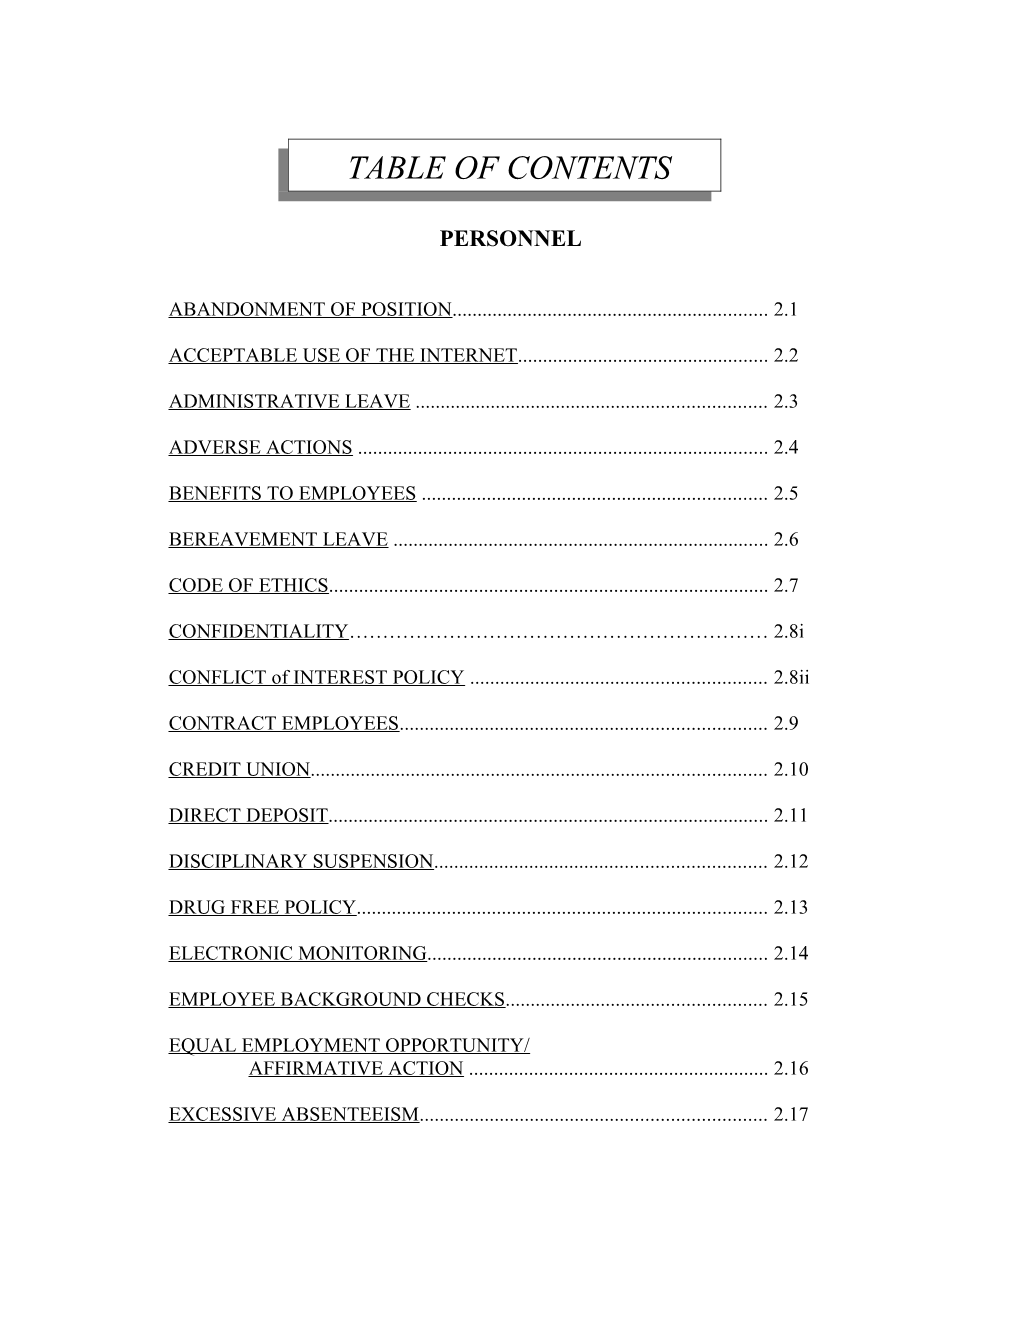 TABLE of CONTENTS s162